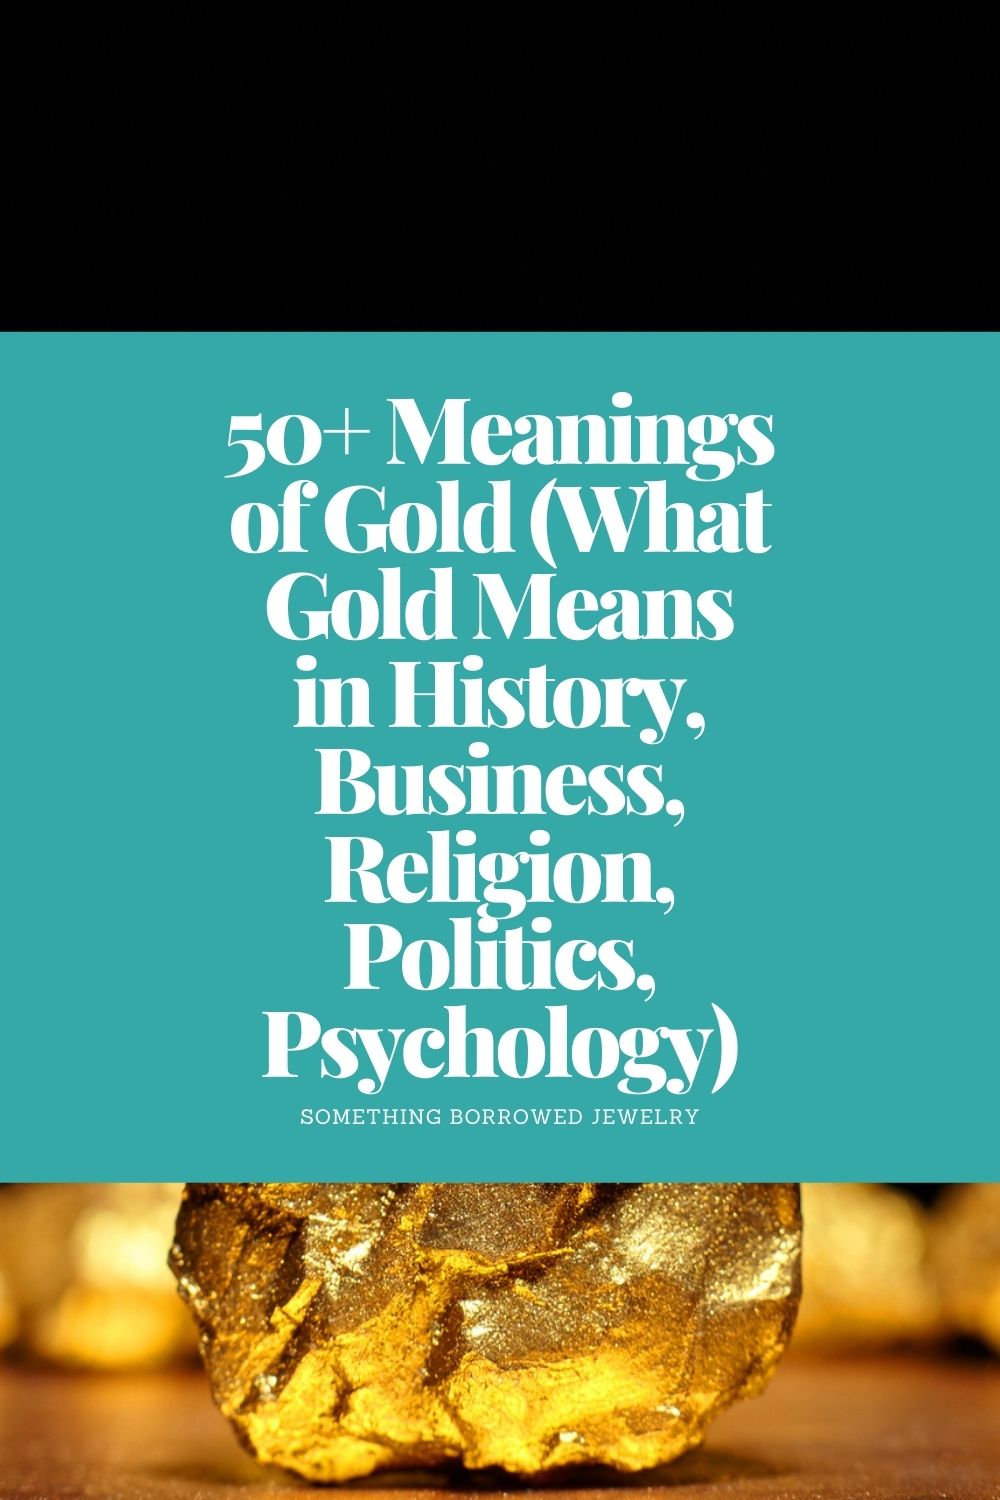 50+ Meanings of Gold (What Gold Means in History, Business, Religion, Politics, Psychology) pin